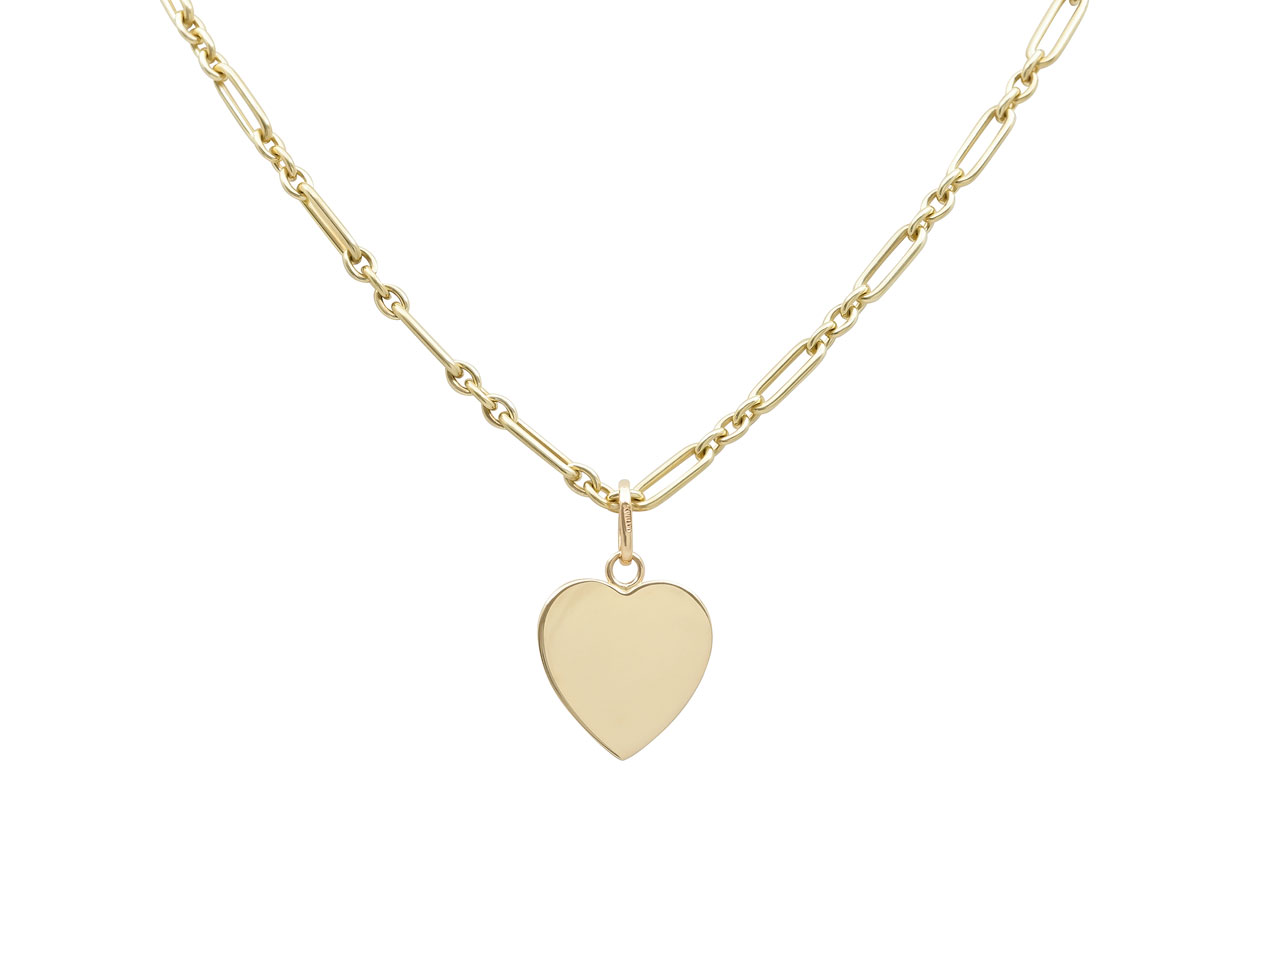 Heart Charm and Oval Link Chain Necklace in 14K Yellow Gold